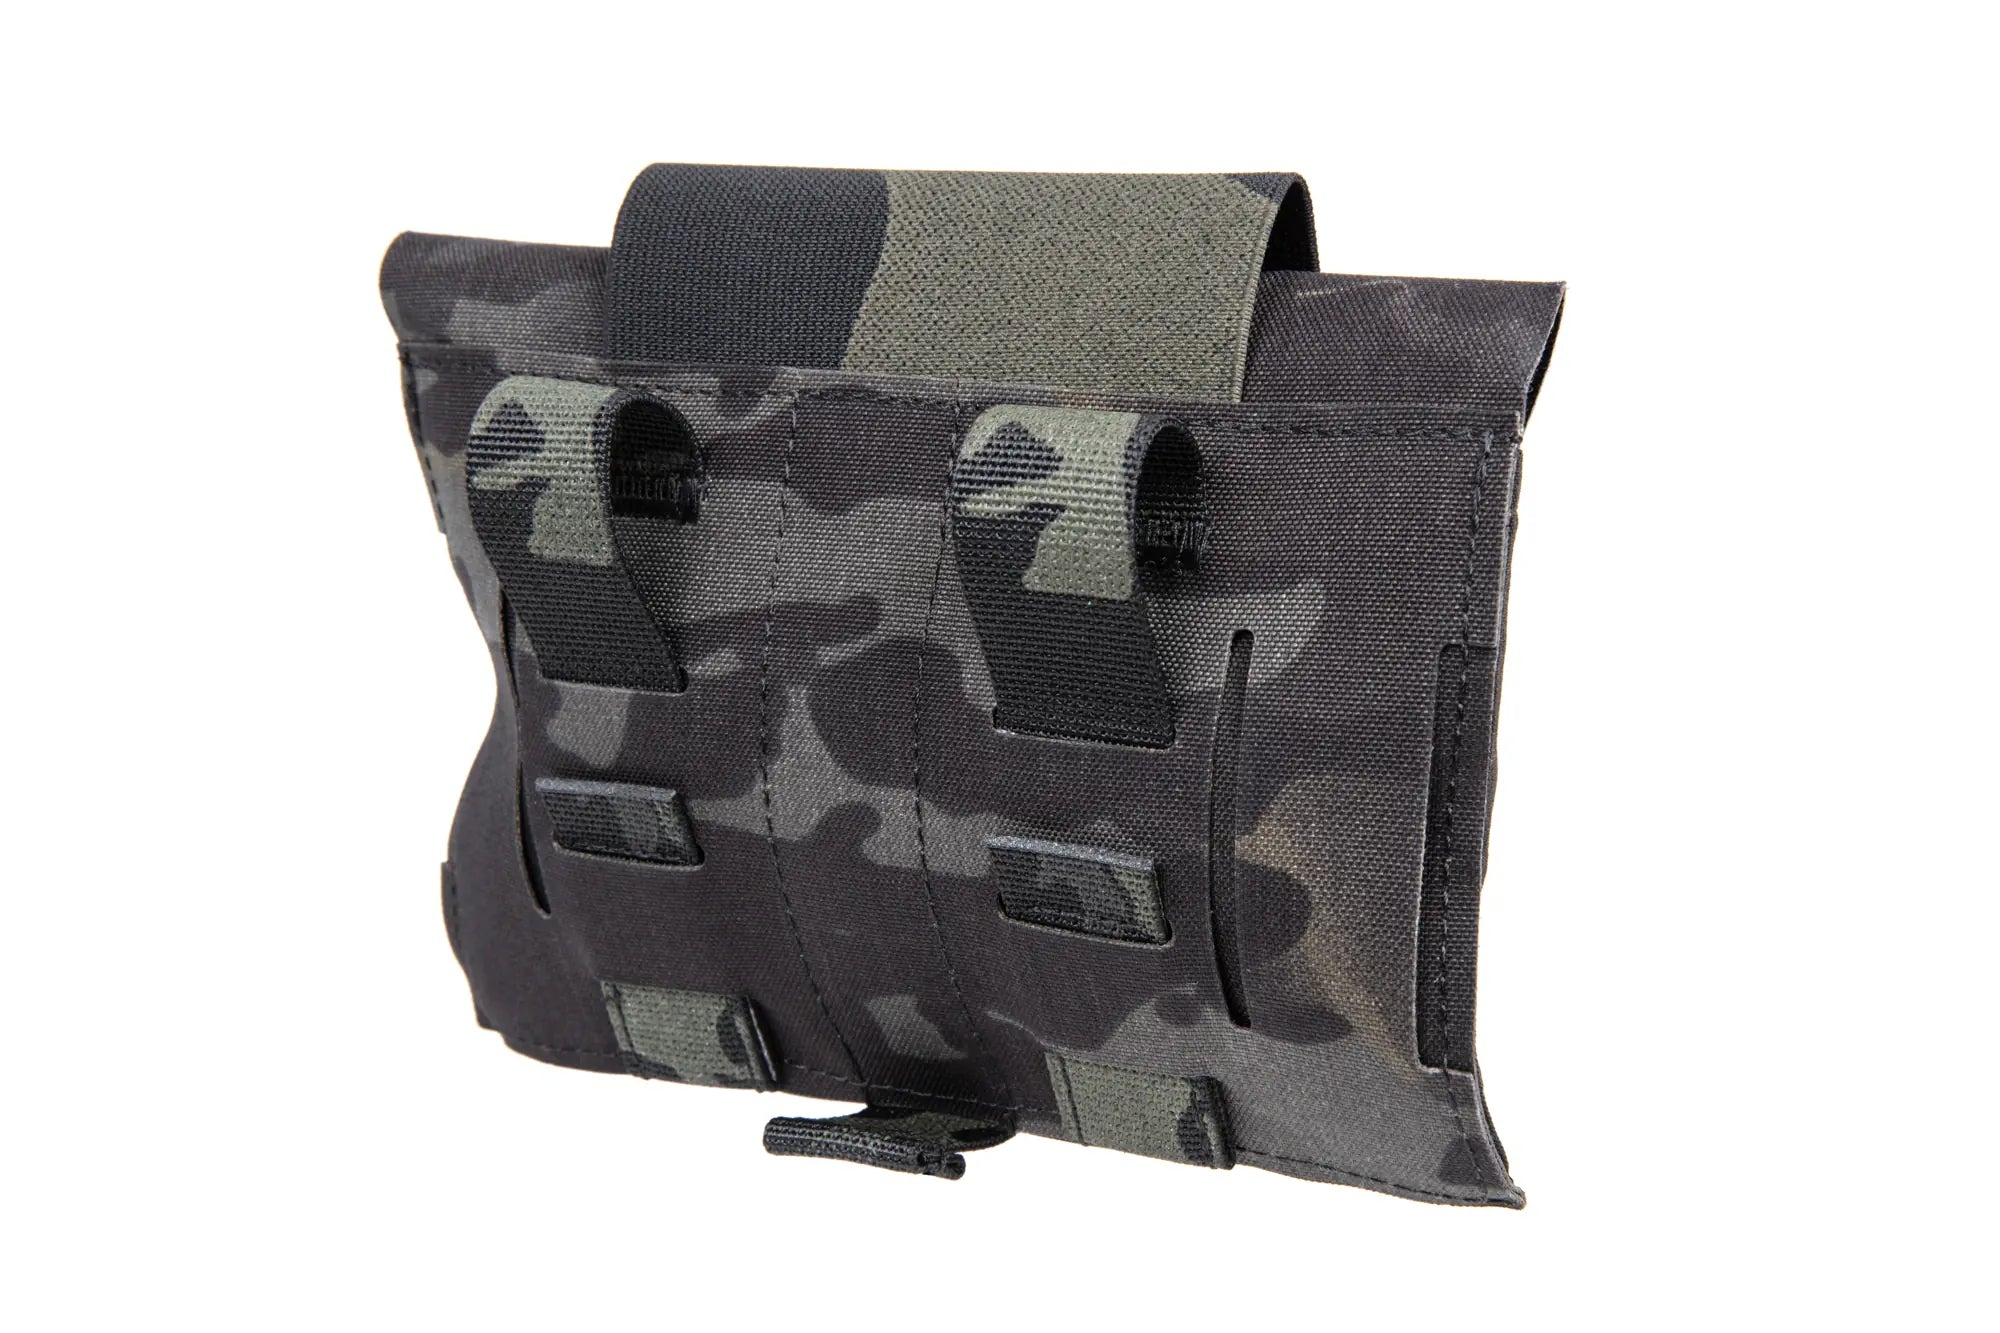 First aid kit with tourniquet sleeve Wosport MultiCam Black-1